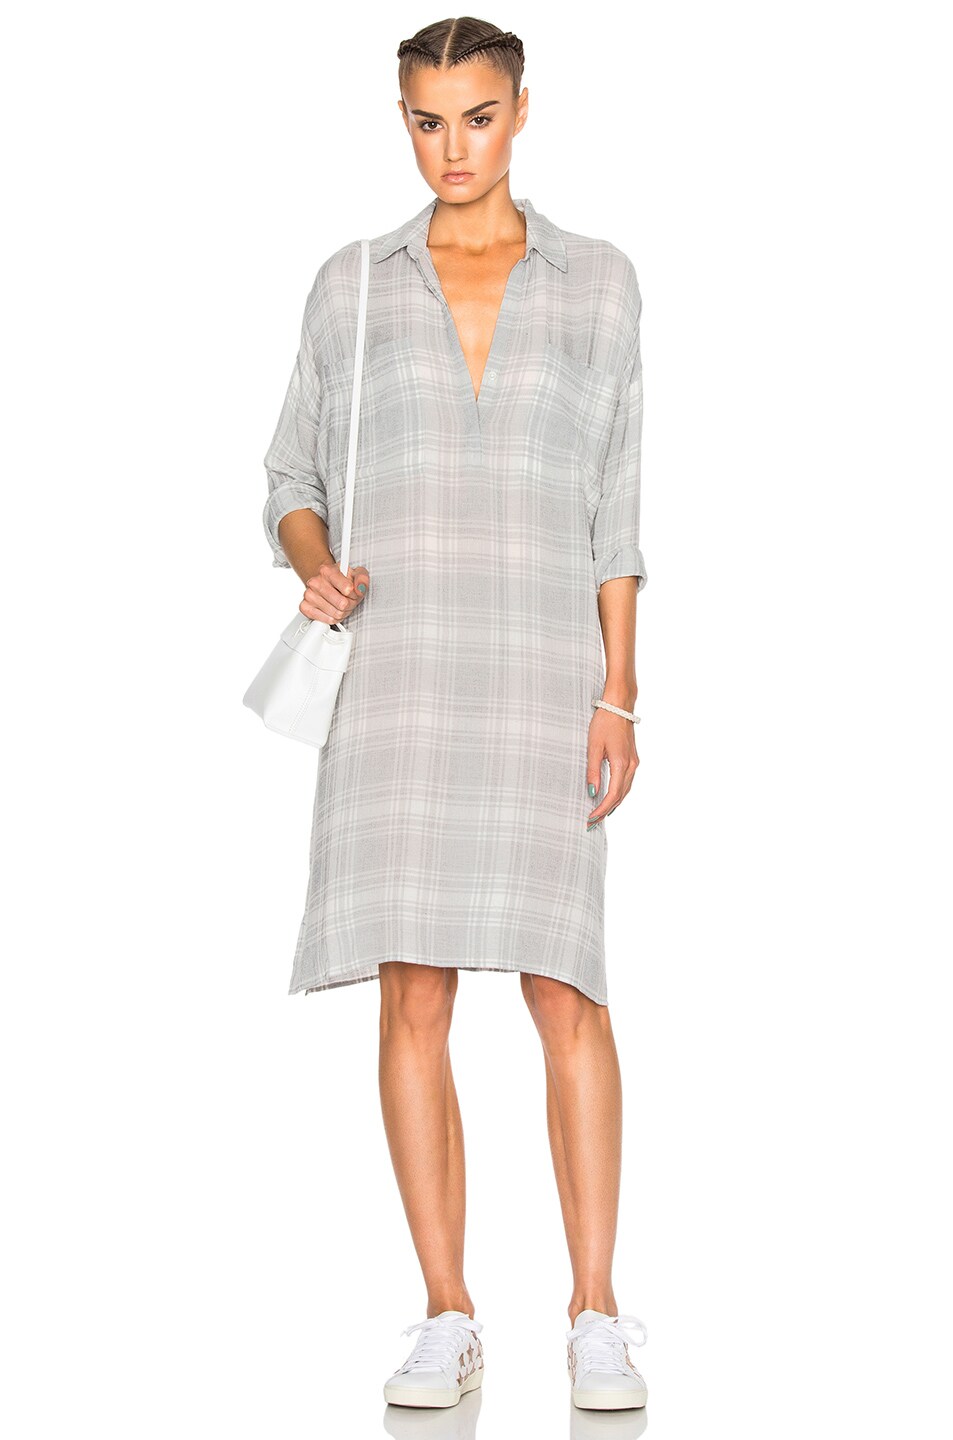 Image 1 of James Perse Plaid Oversize Shirt Dress in Light Grey Plaid